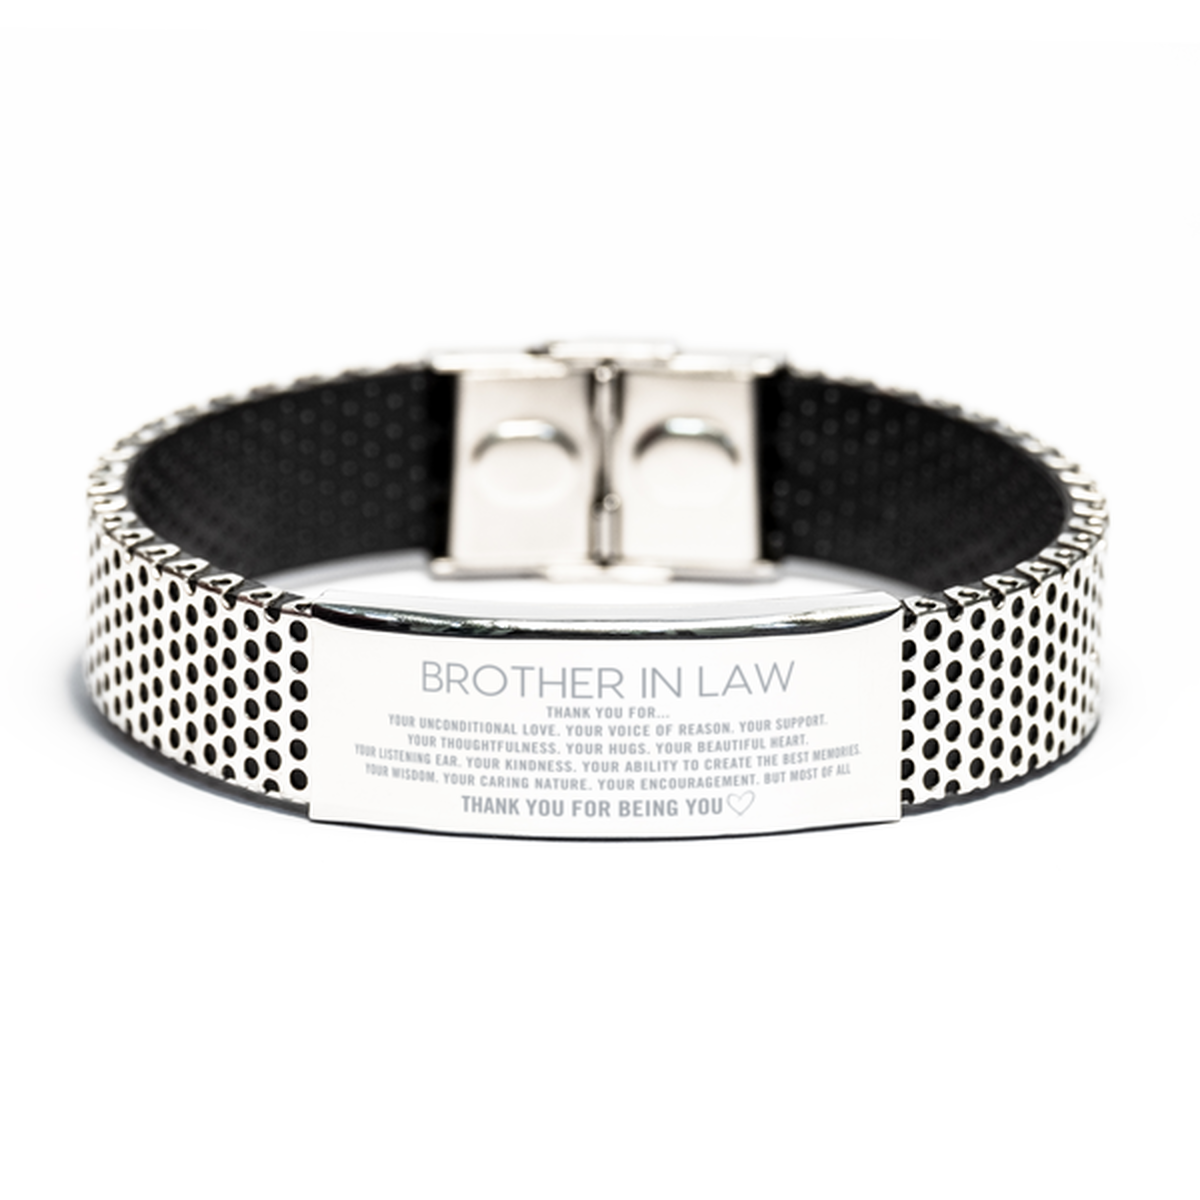 Brother In Law Stainless Steel Bracelet Custom, Engraved Gifts For Brother In Law Christmas Graduation Birthday Gifts for Men Women Brother In Law Thank you for Your unconditional love